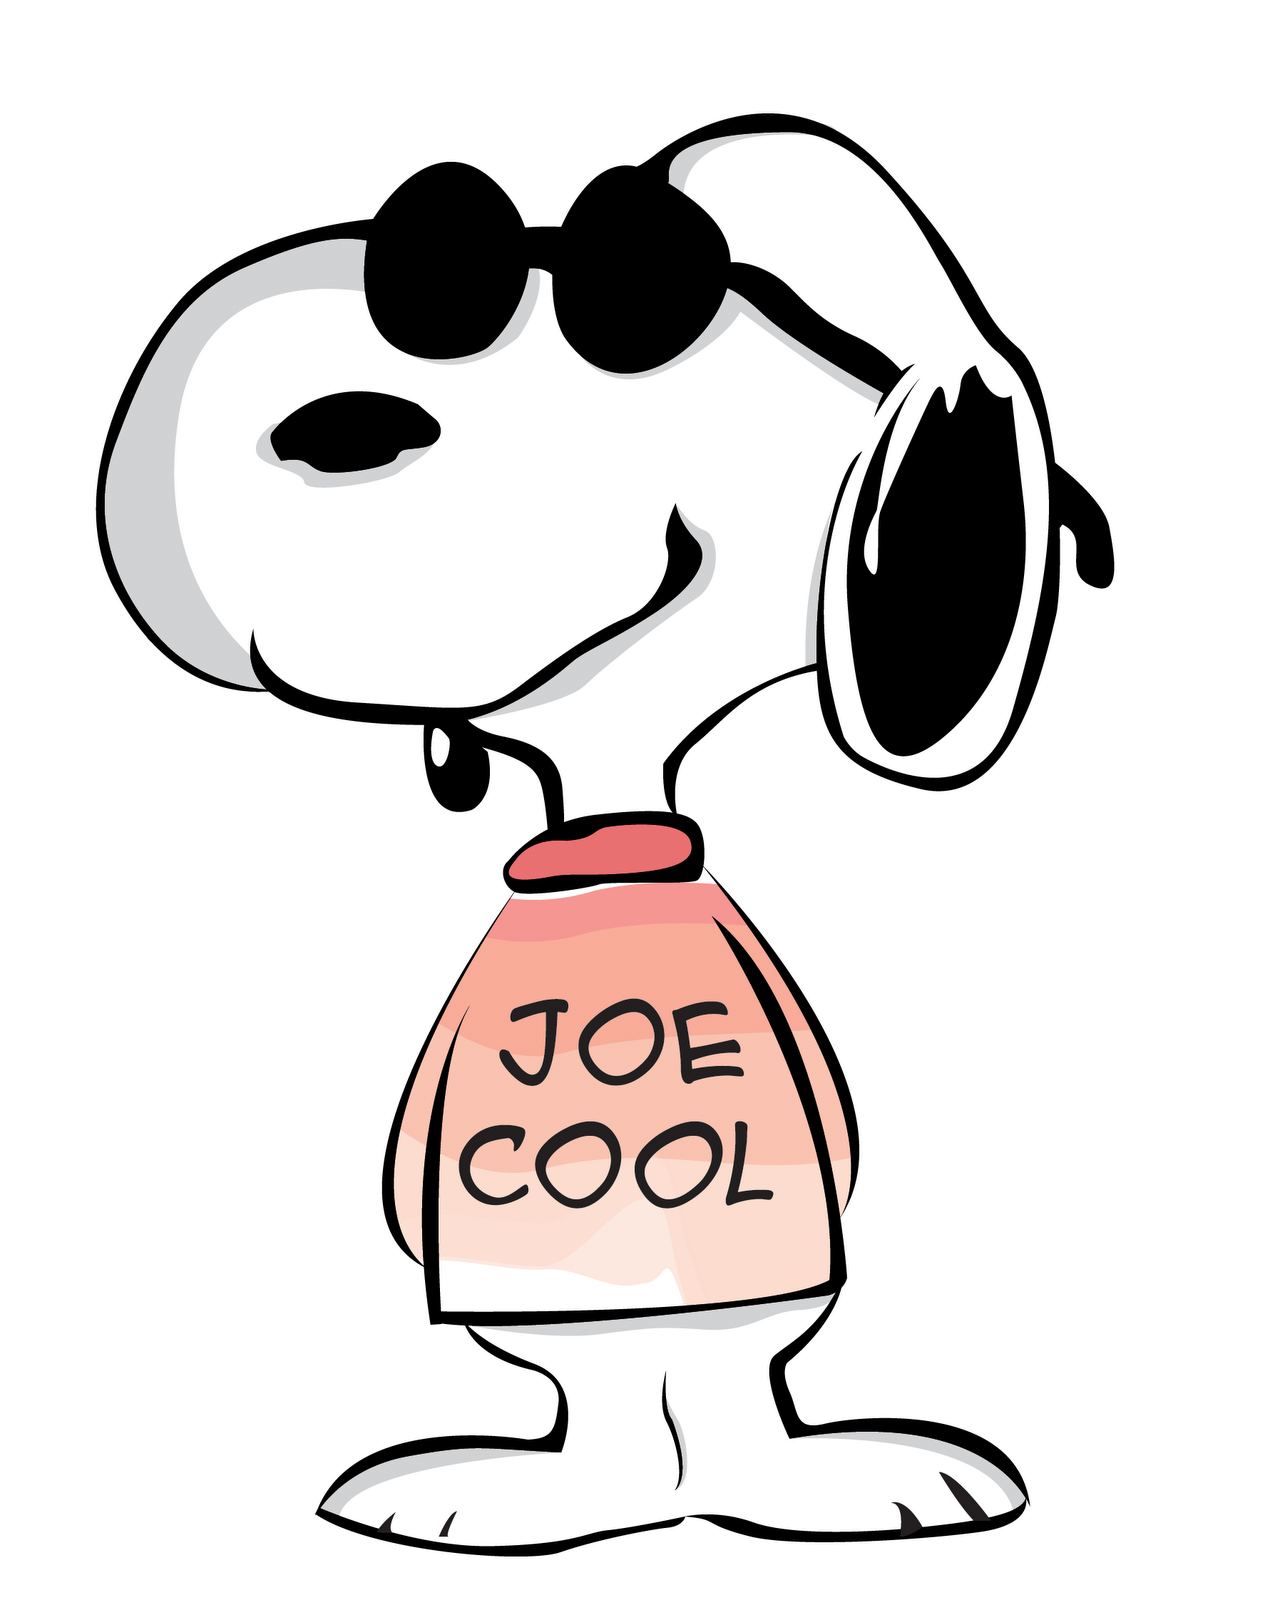 Snoopy Dog Wallpapers